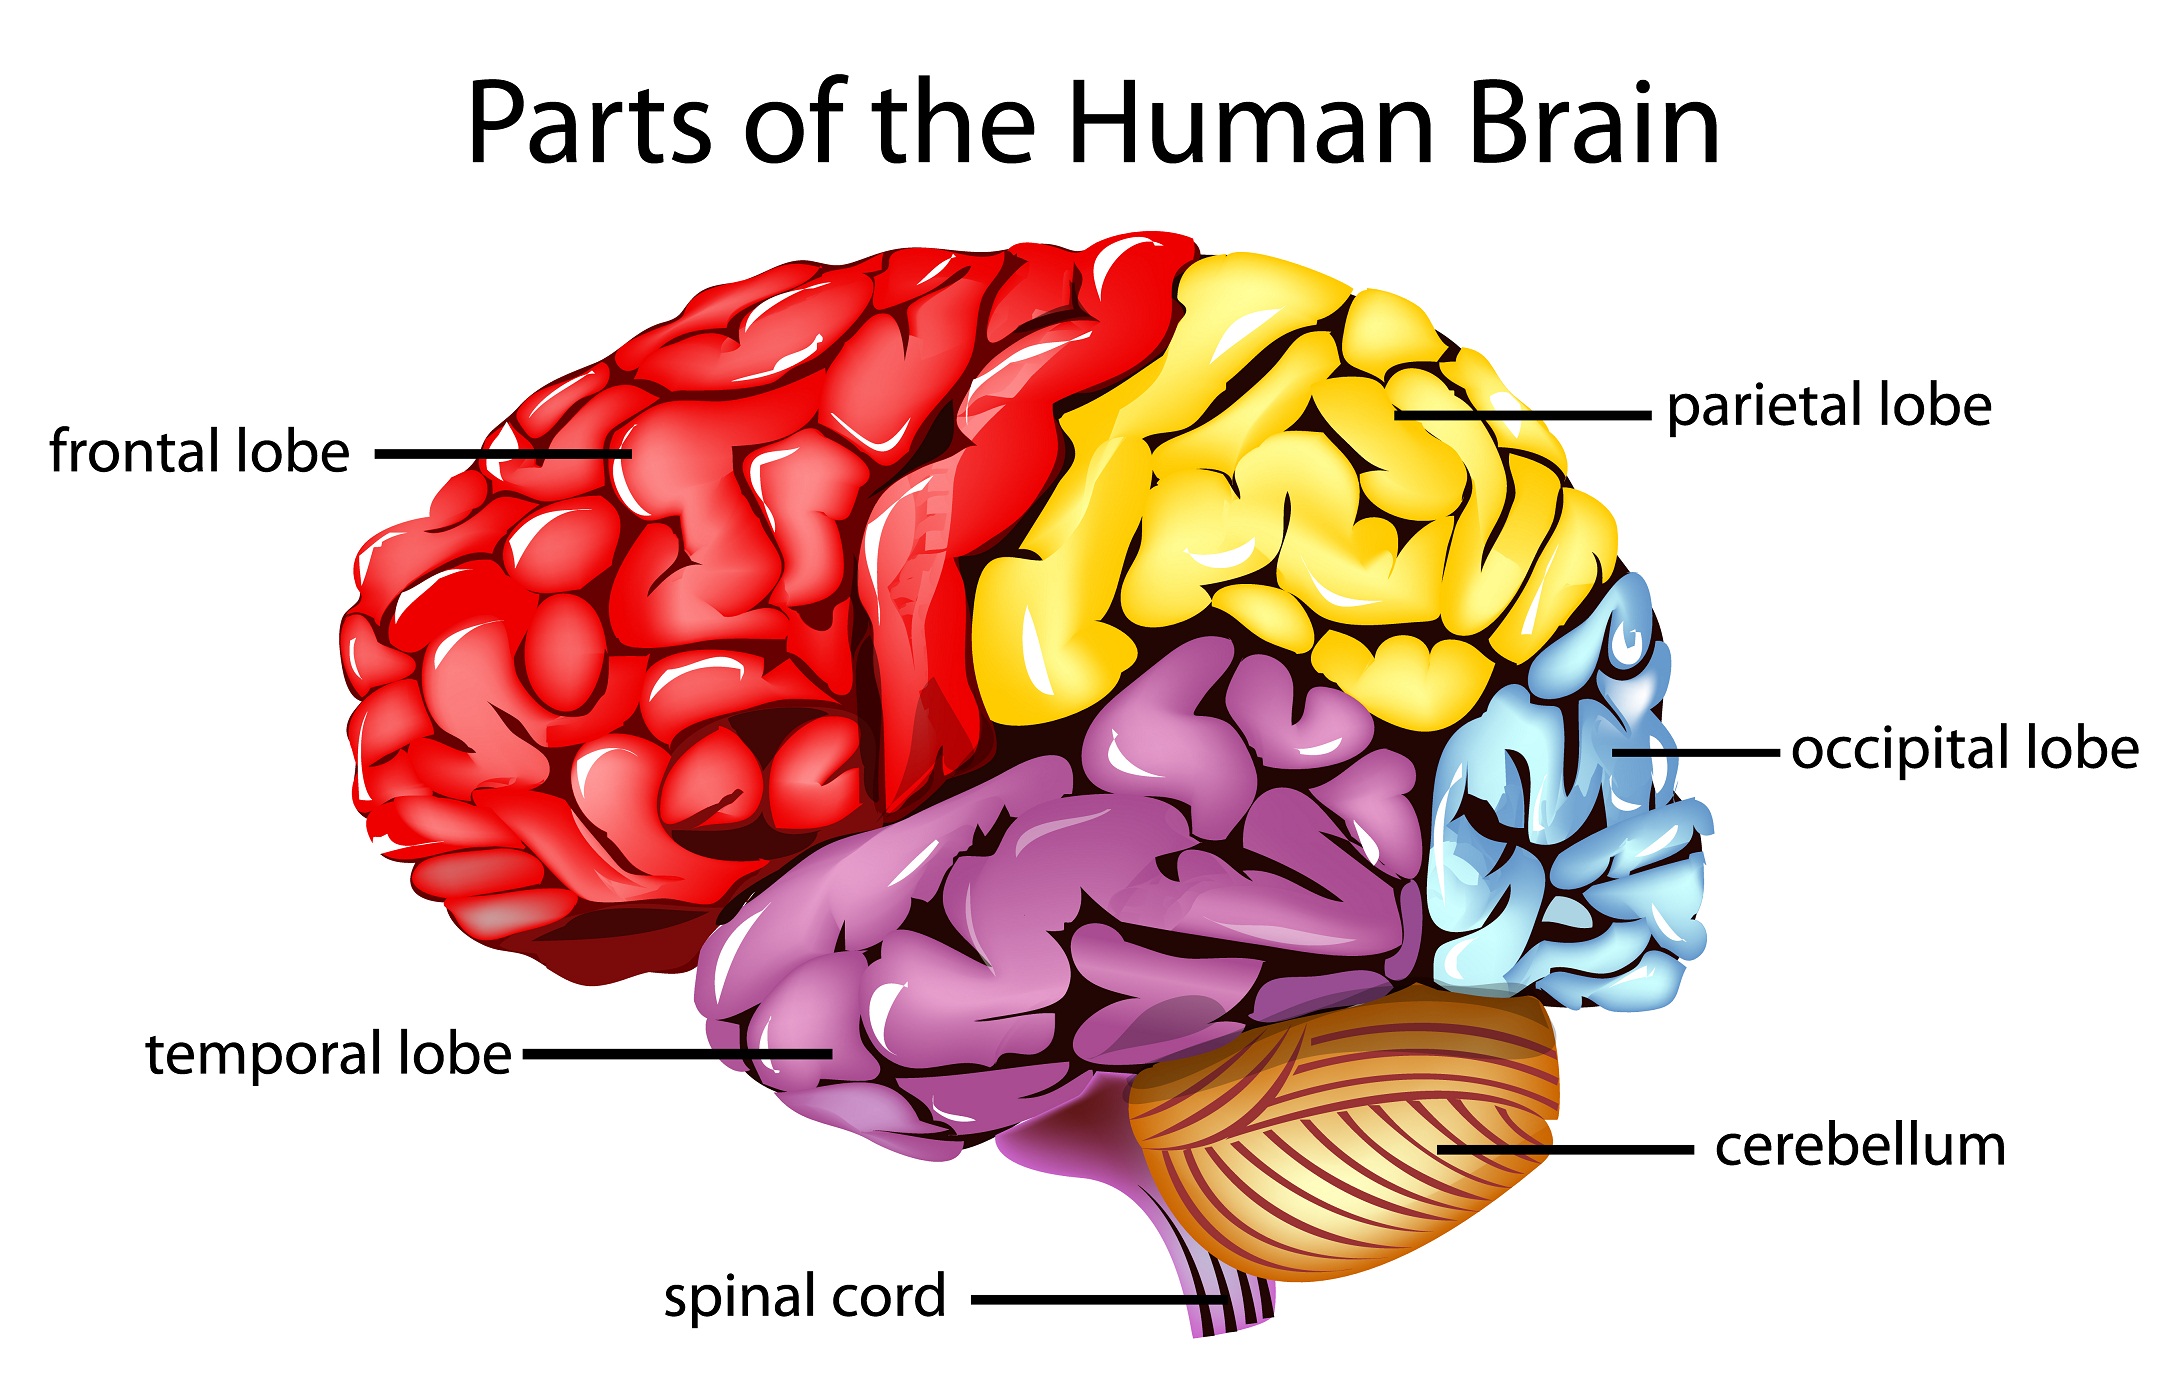 Brain diagram unlabeled 391 Unlabeled Brain Diagram, Thing That ...